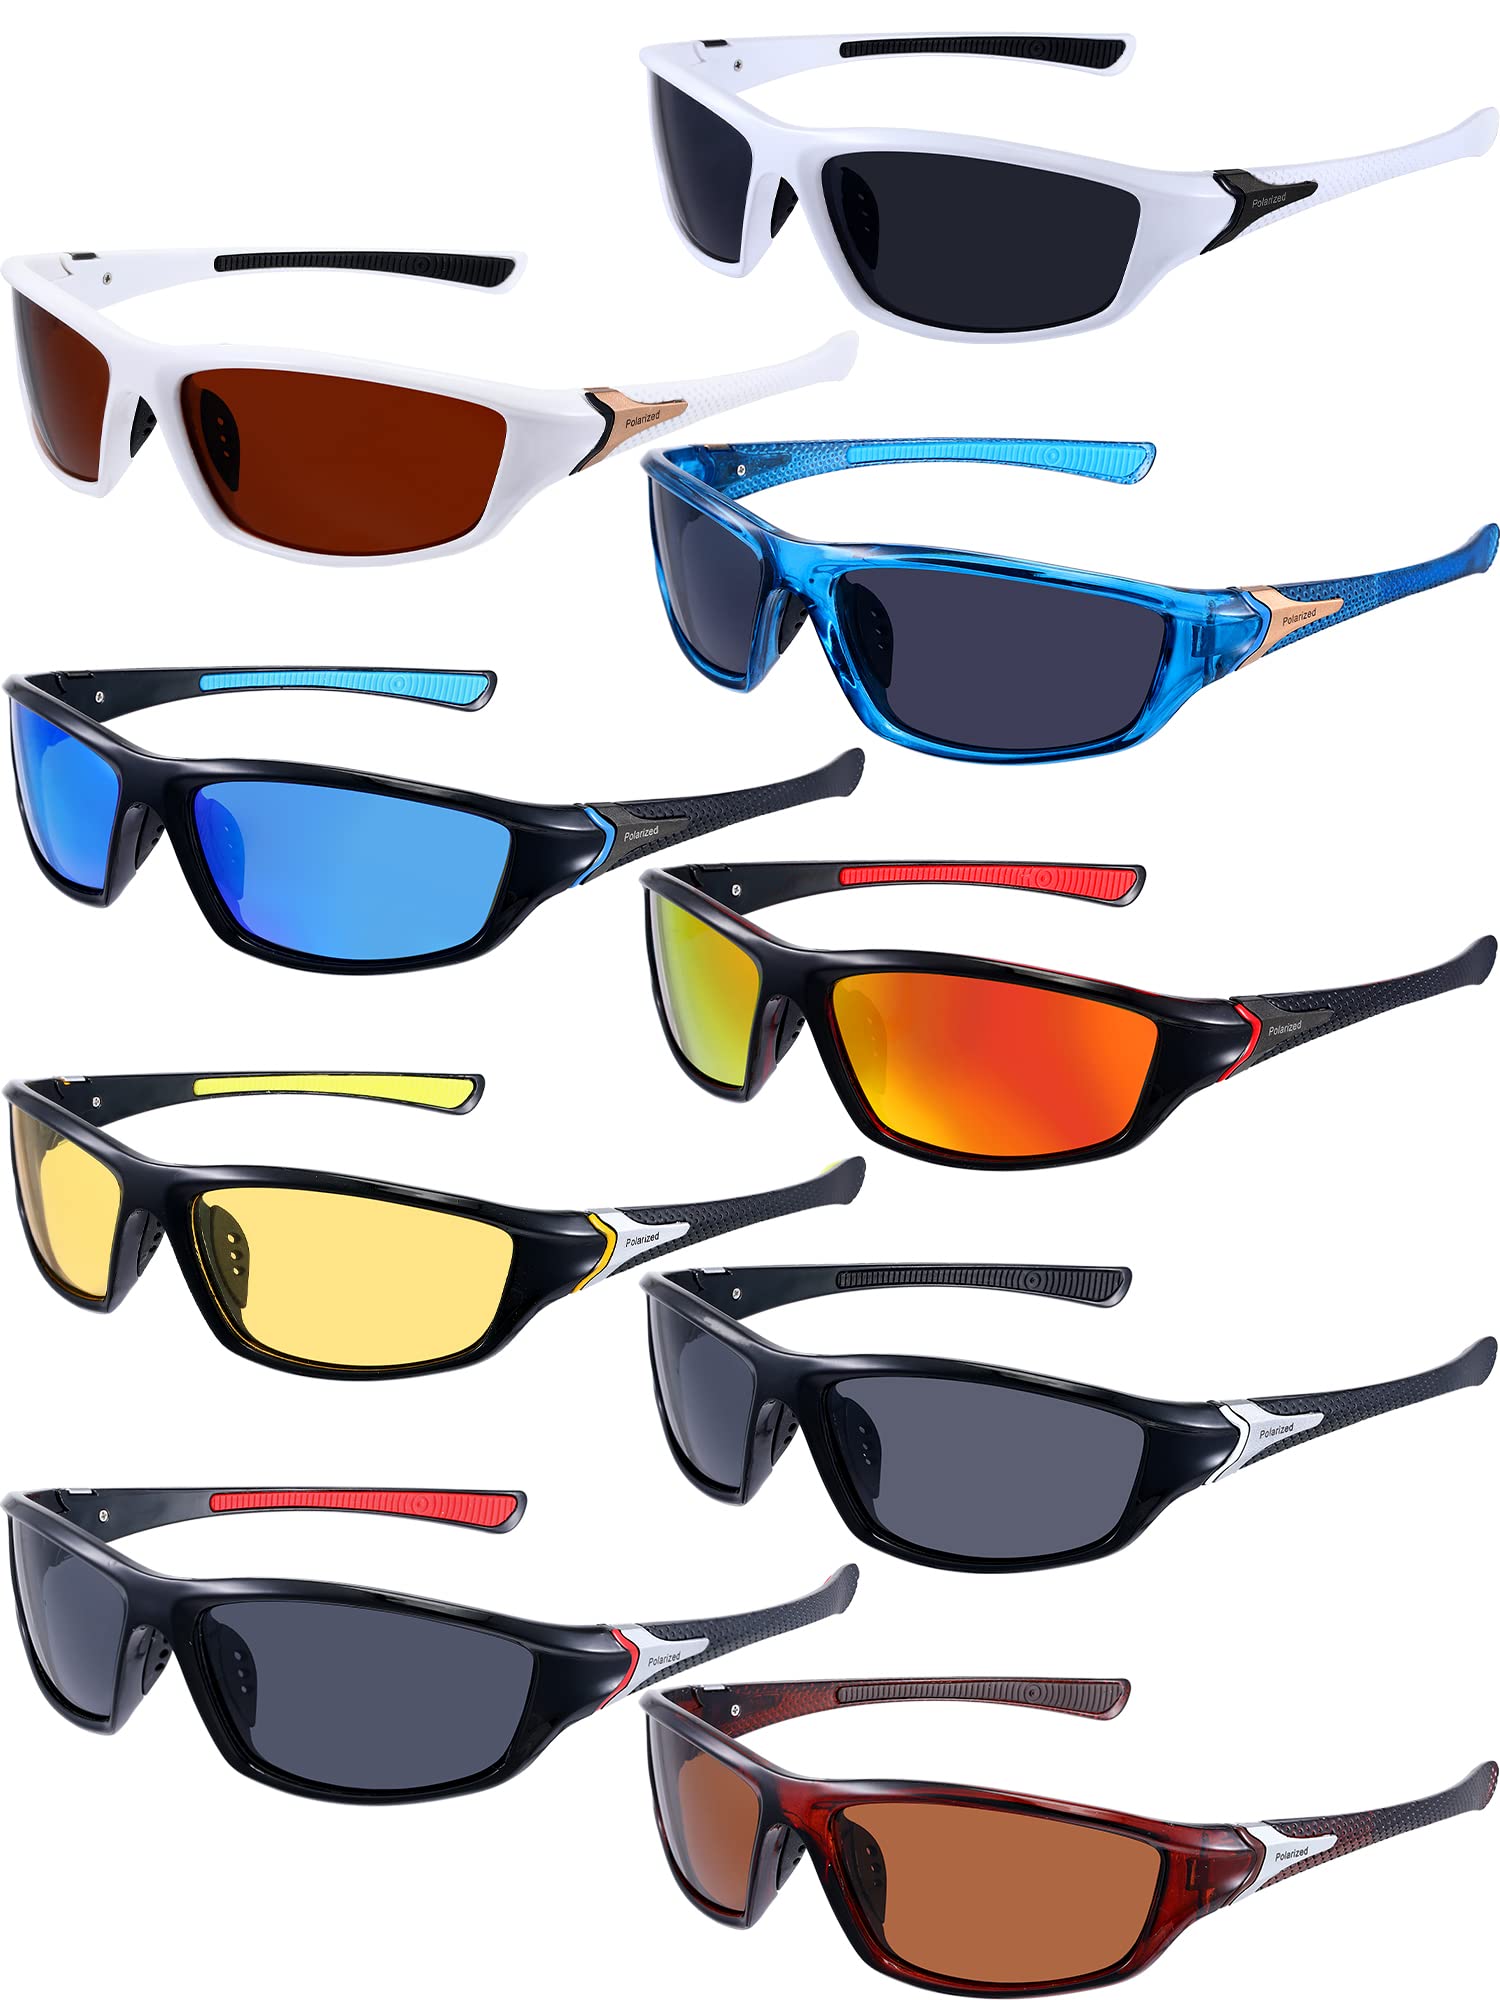 9 Pairs Polarized Sports Sunglasses Driving Shades Running Sunglasses for Men  Polarized Tactical Sunglasses Classic Colors